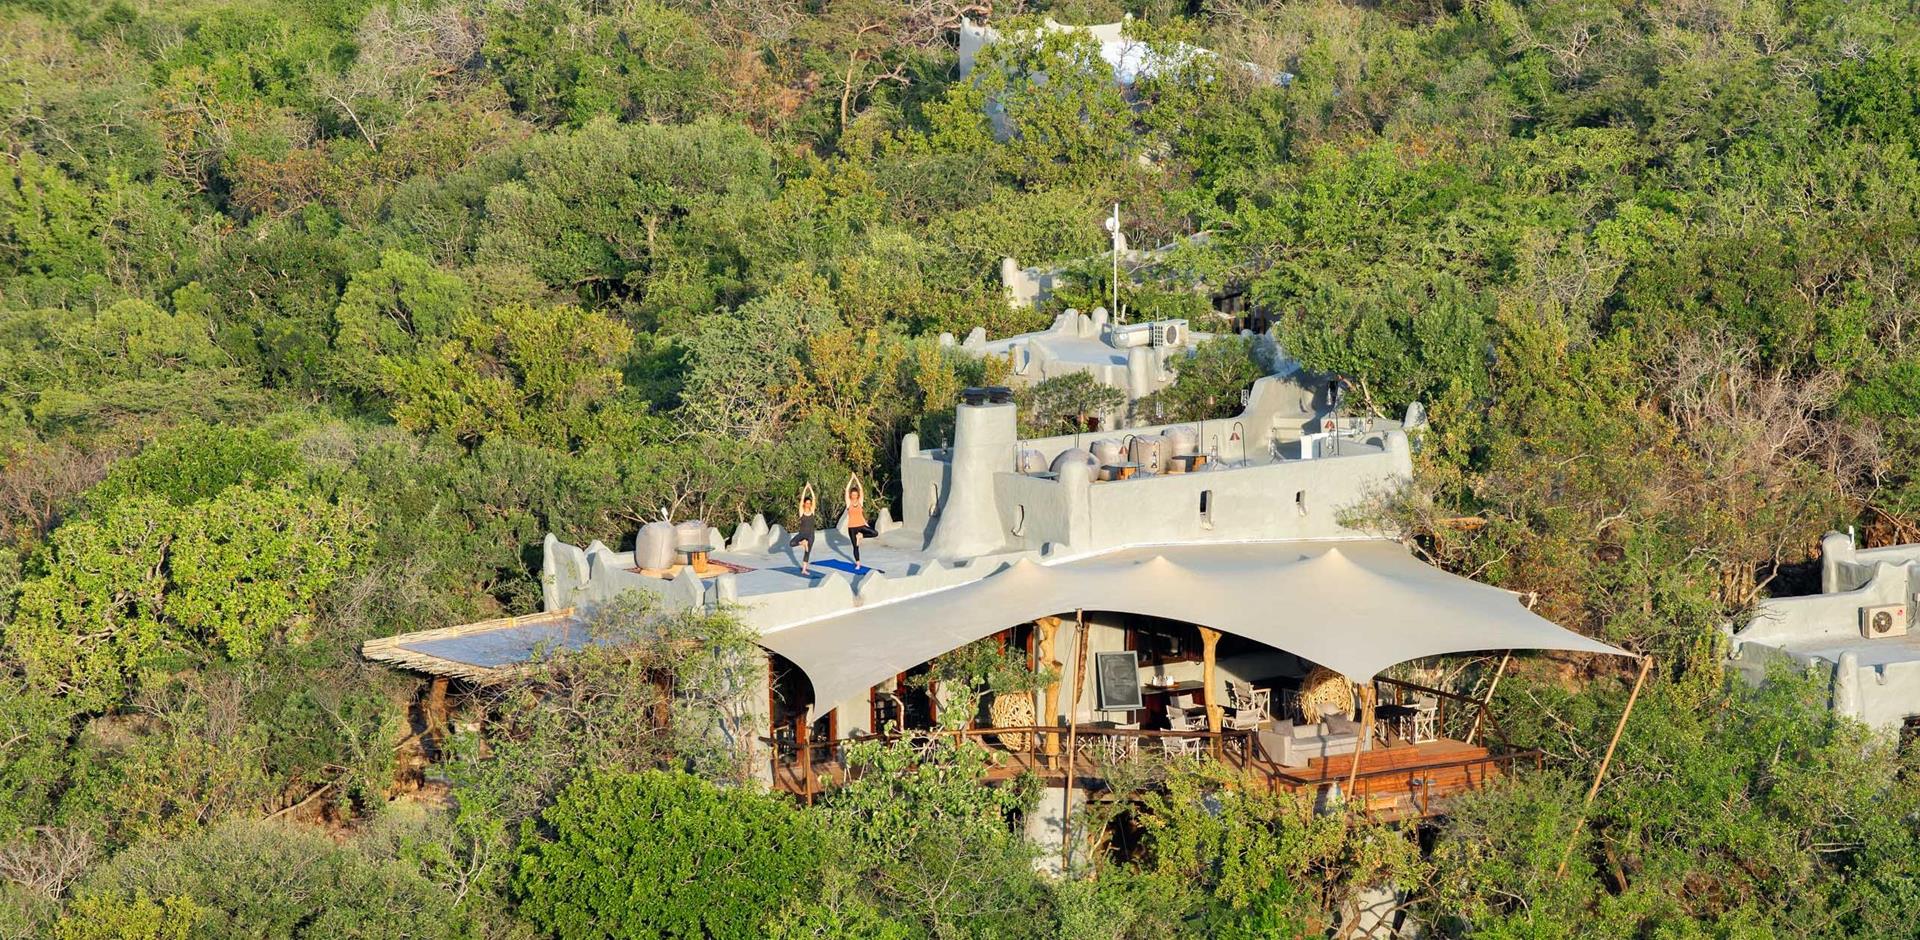 Roof yoga, andBeyond Phinda Rock Lodge, South Africa, A&K